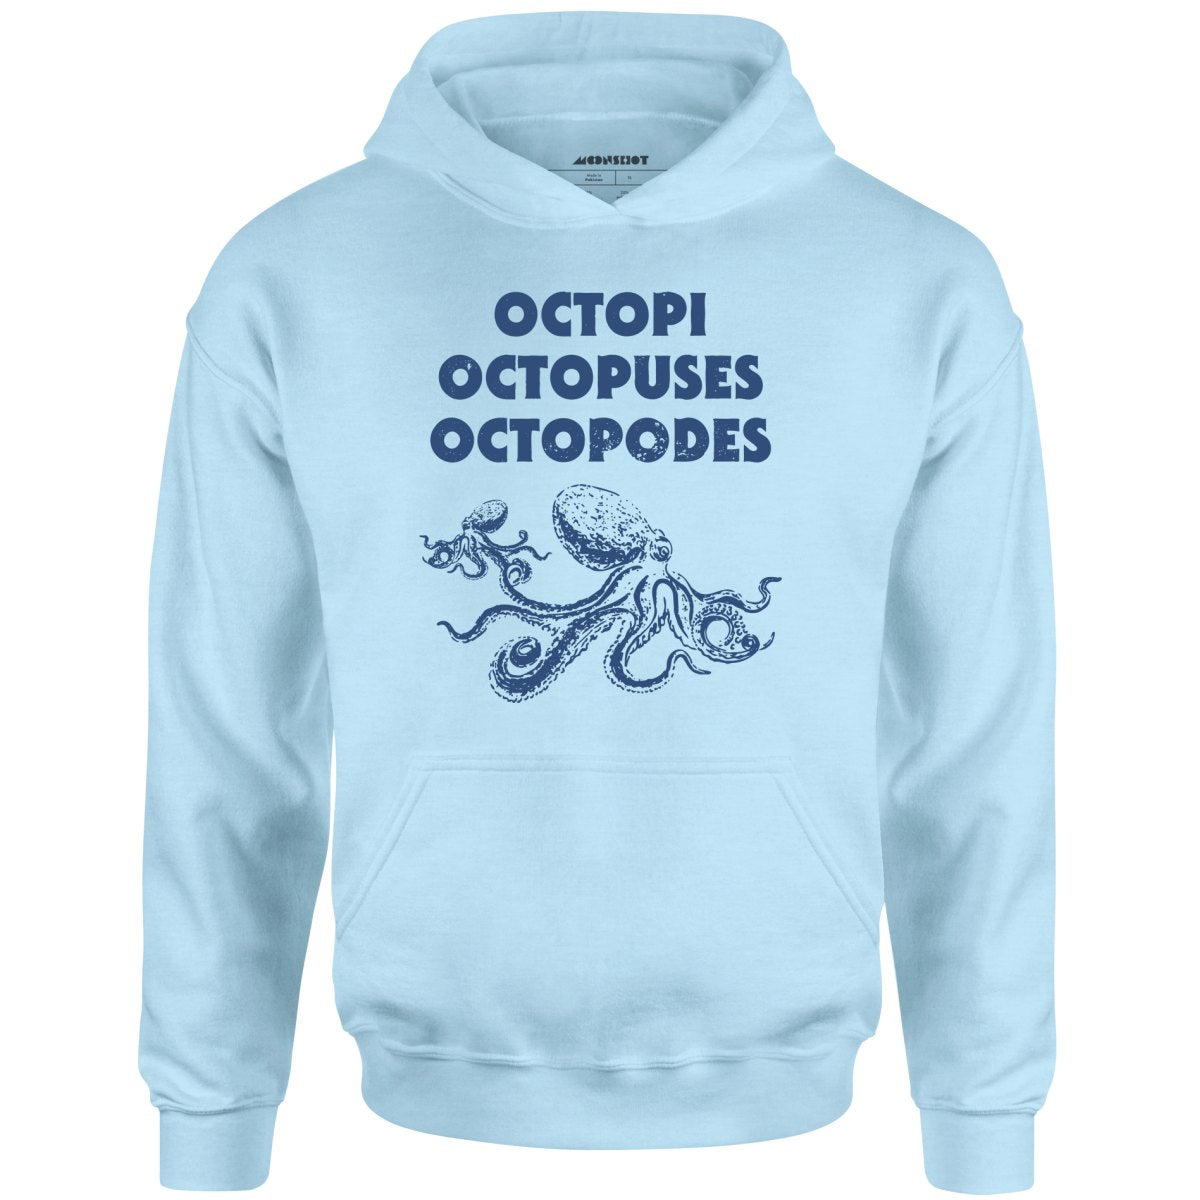 Octopi Octopuses Octopodes - Unisex Hoodie